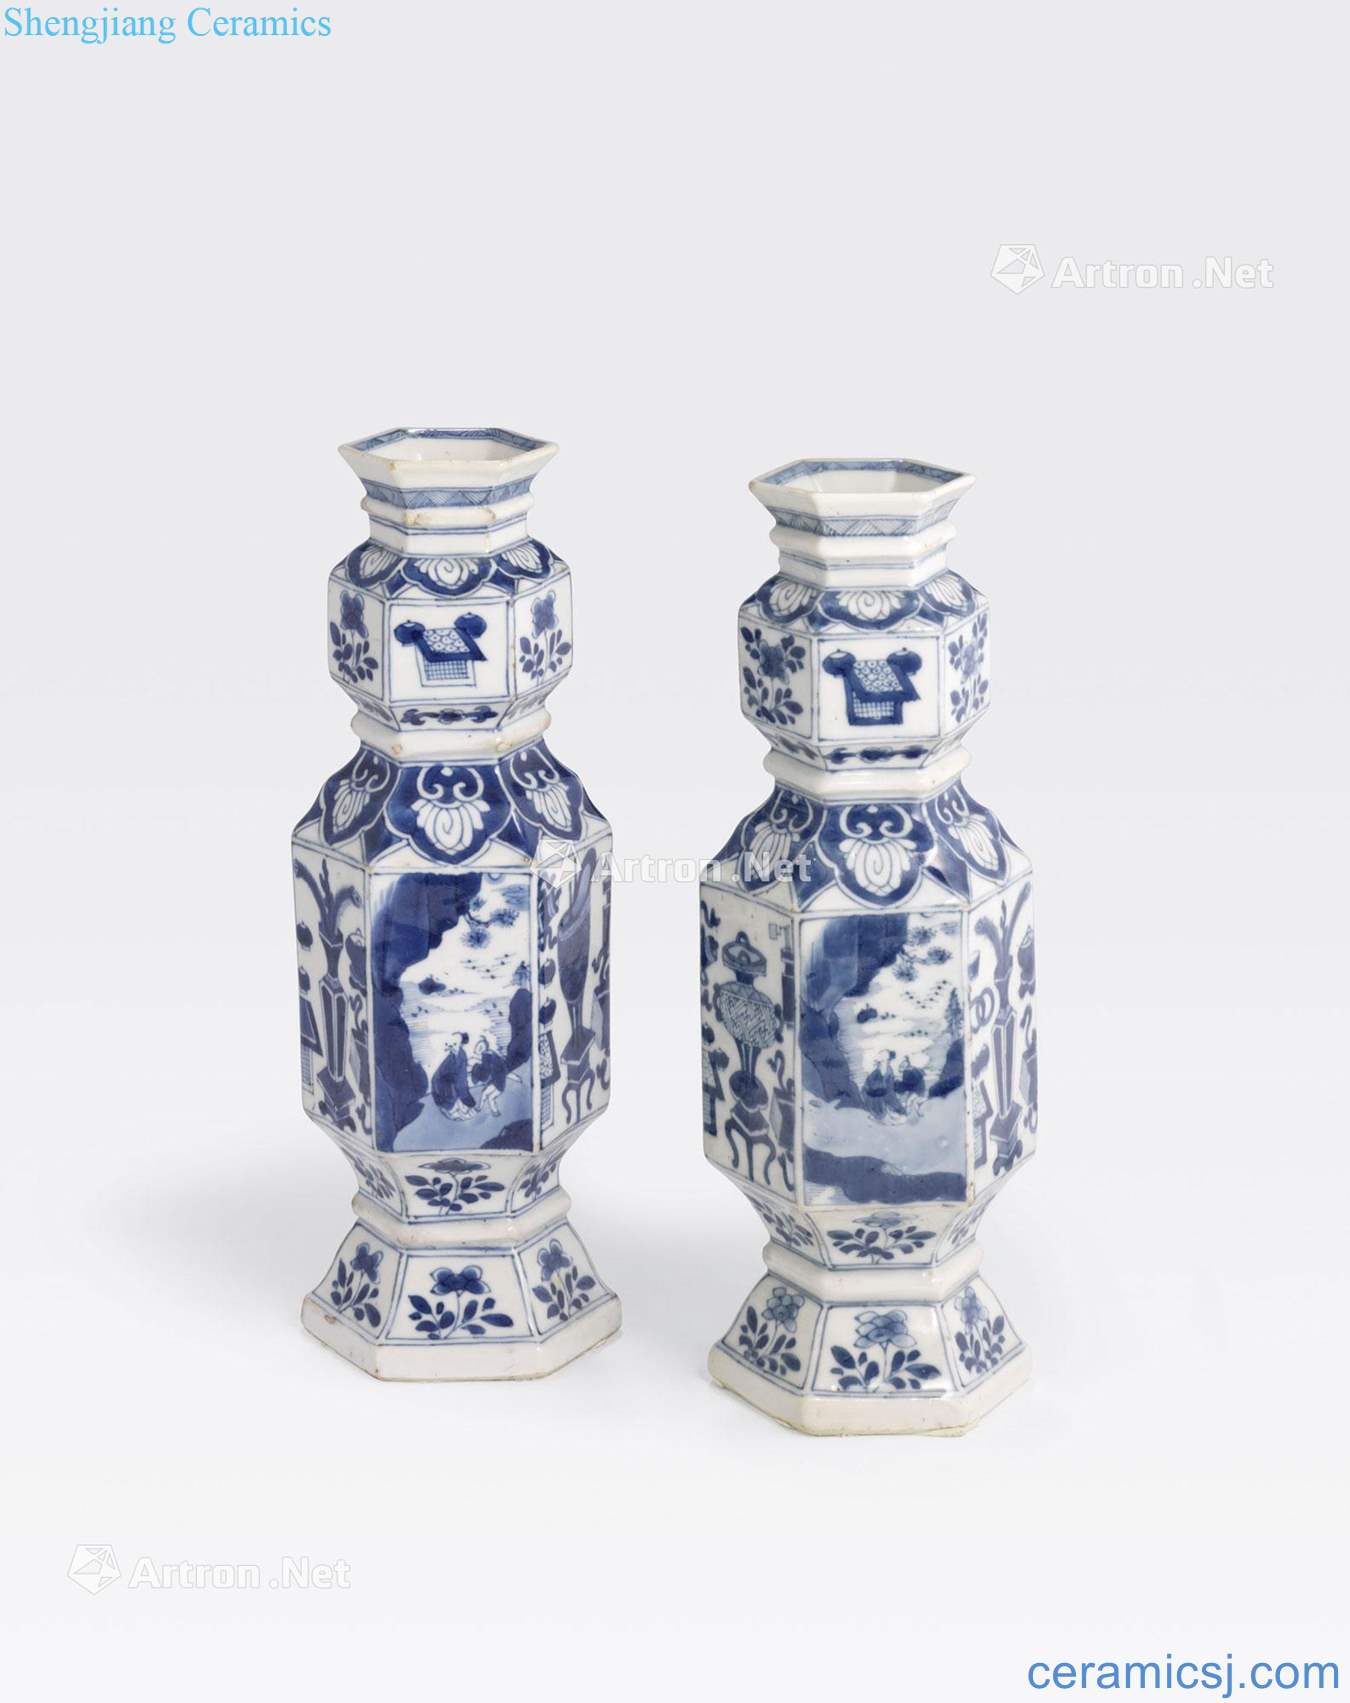 Kangxi period A PAIR OF BLUE AND WHITE HEXAGONAL - SECTIONED VASES